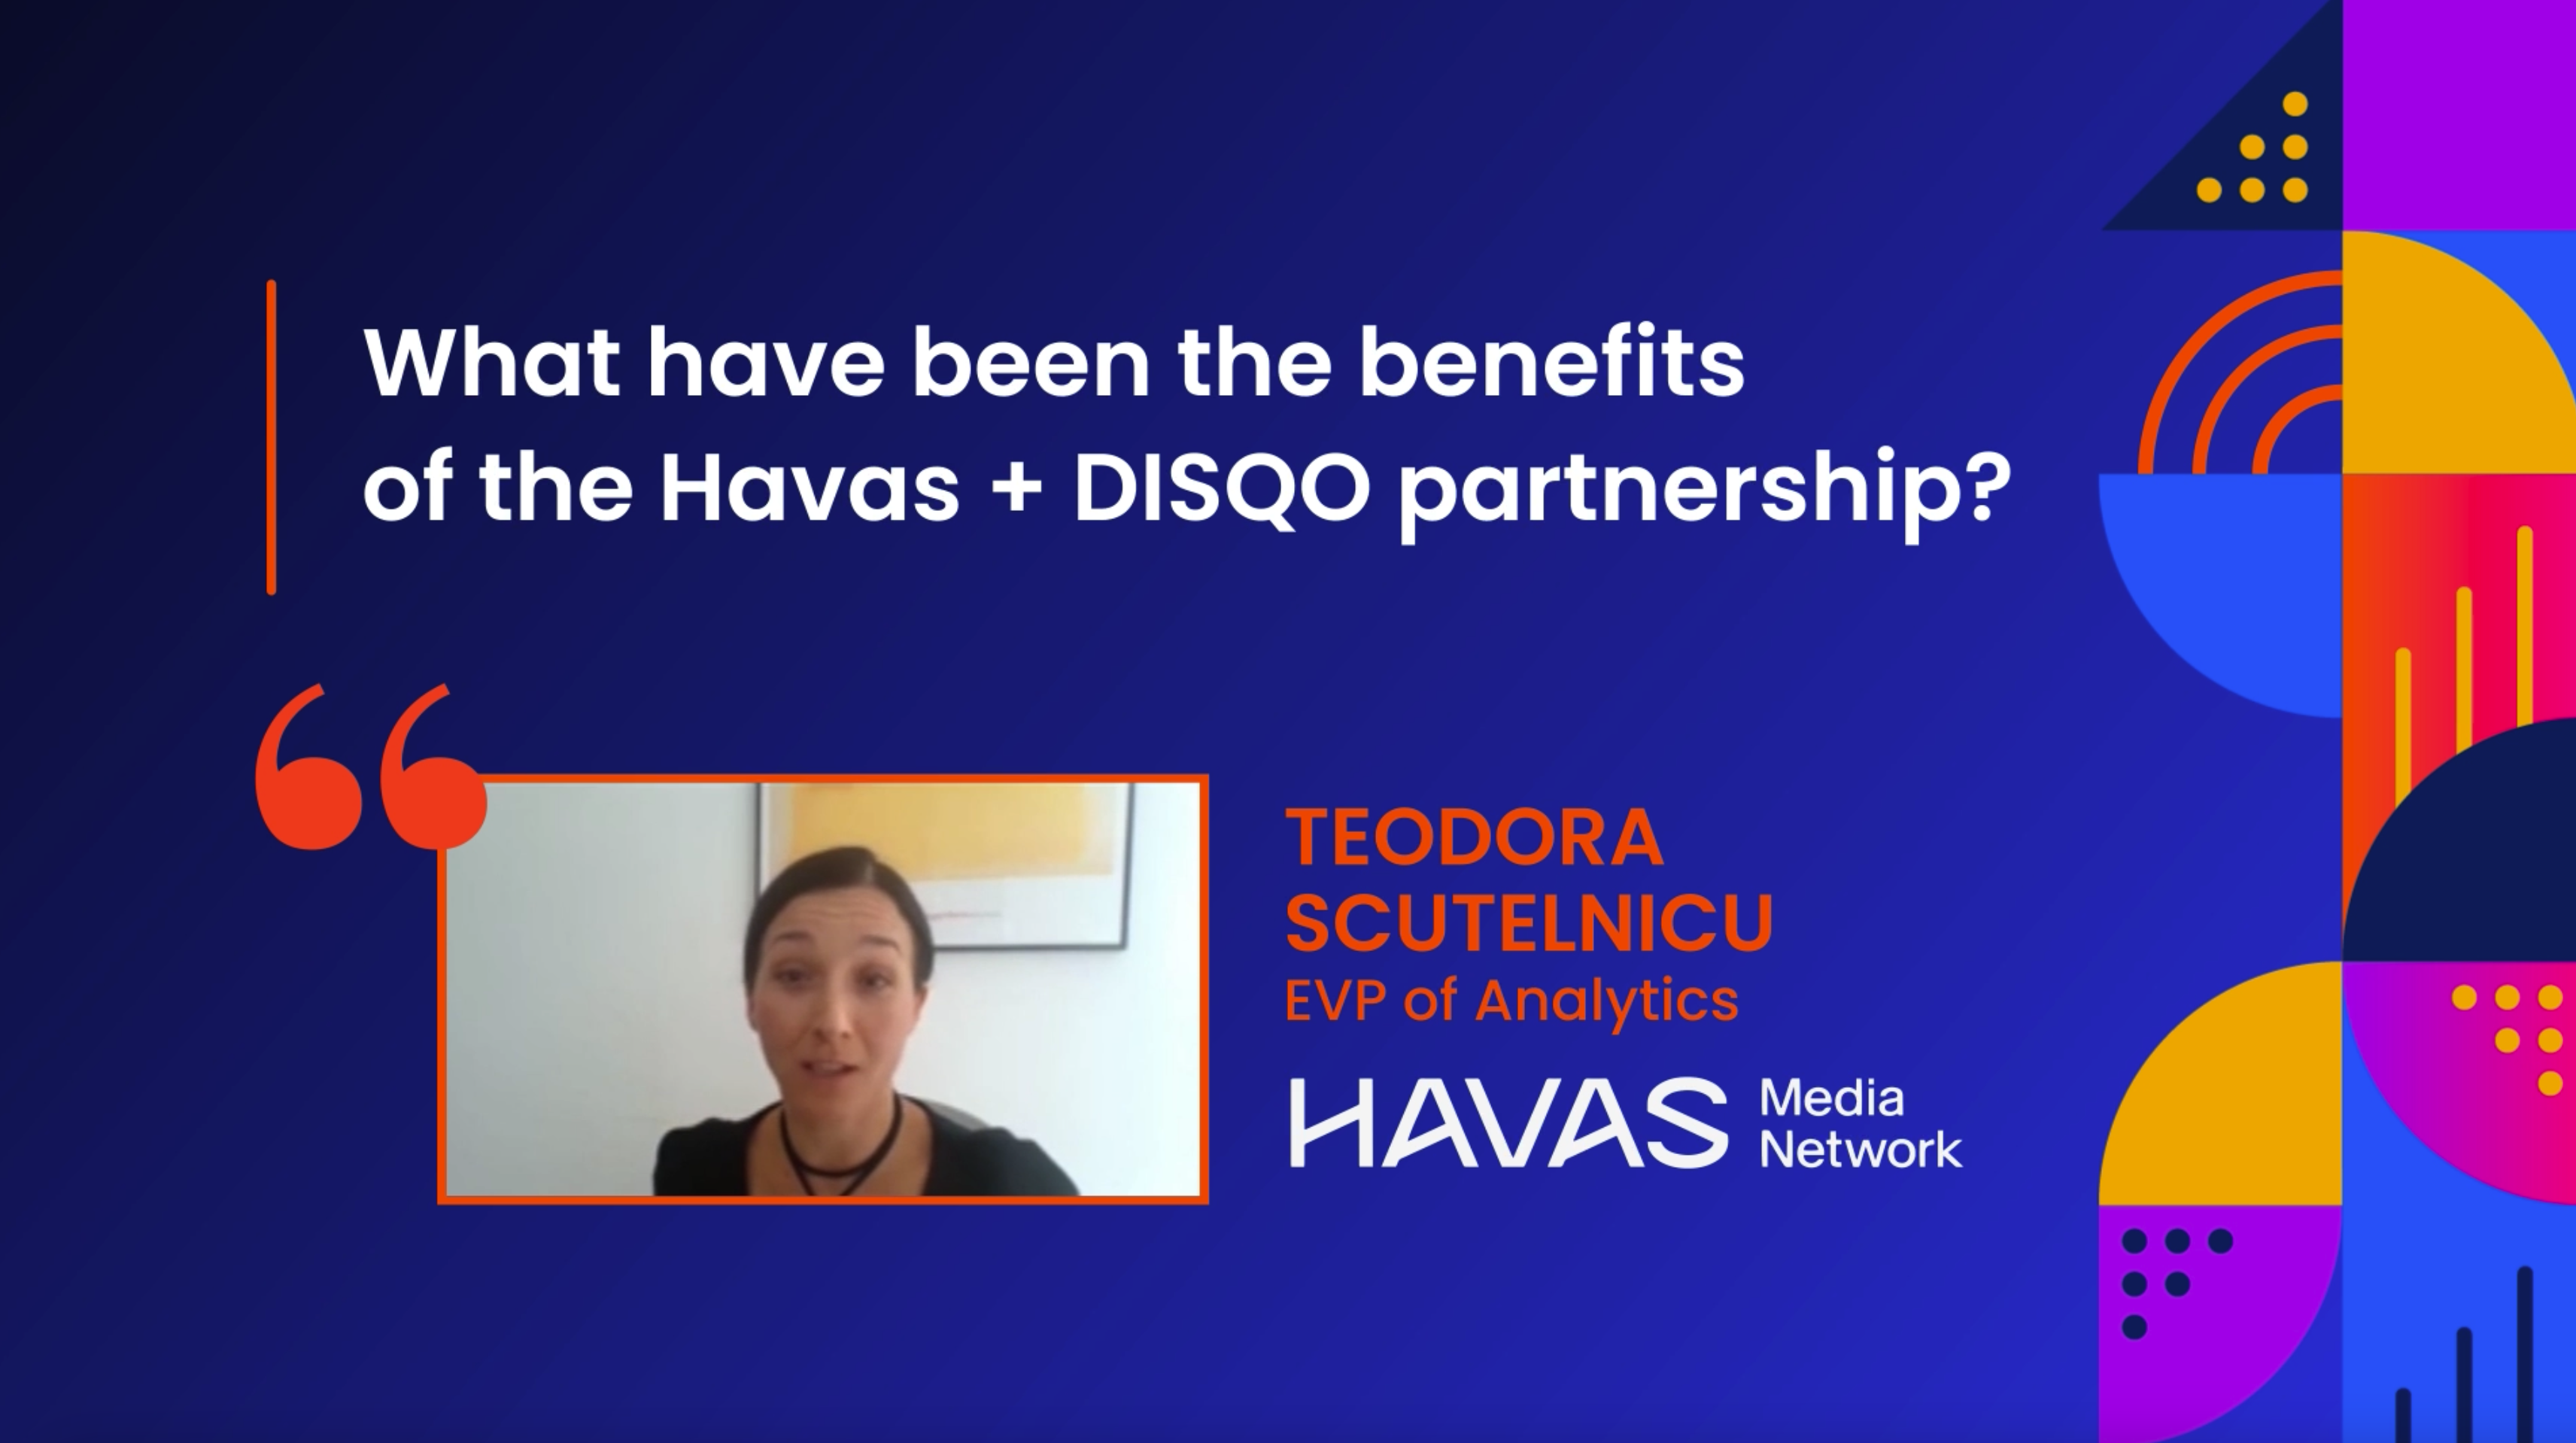 Image of a still from the Havas Media Network client video with Teodora Scutelnicu.